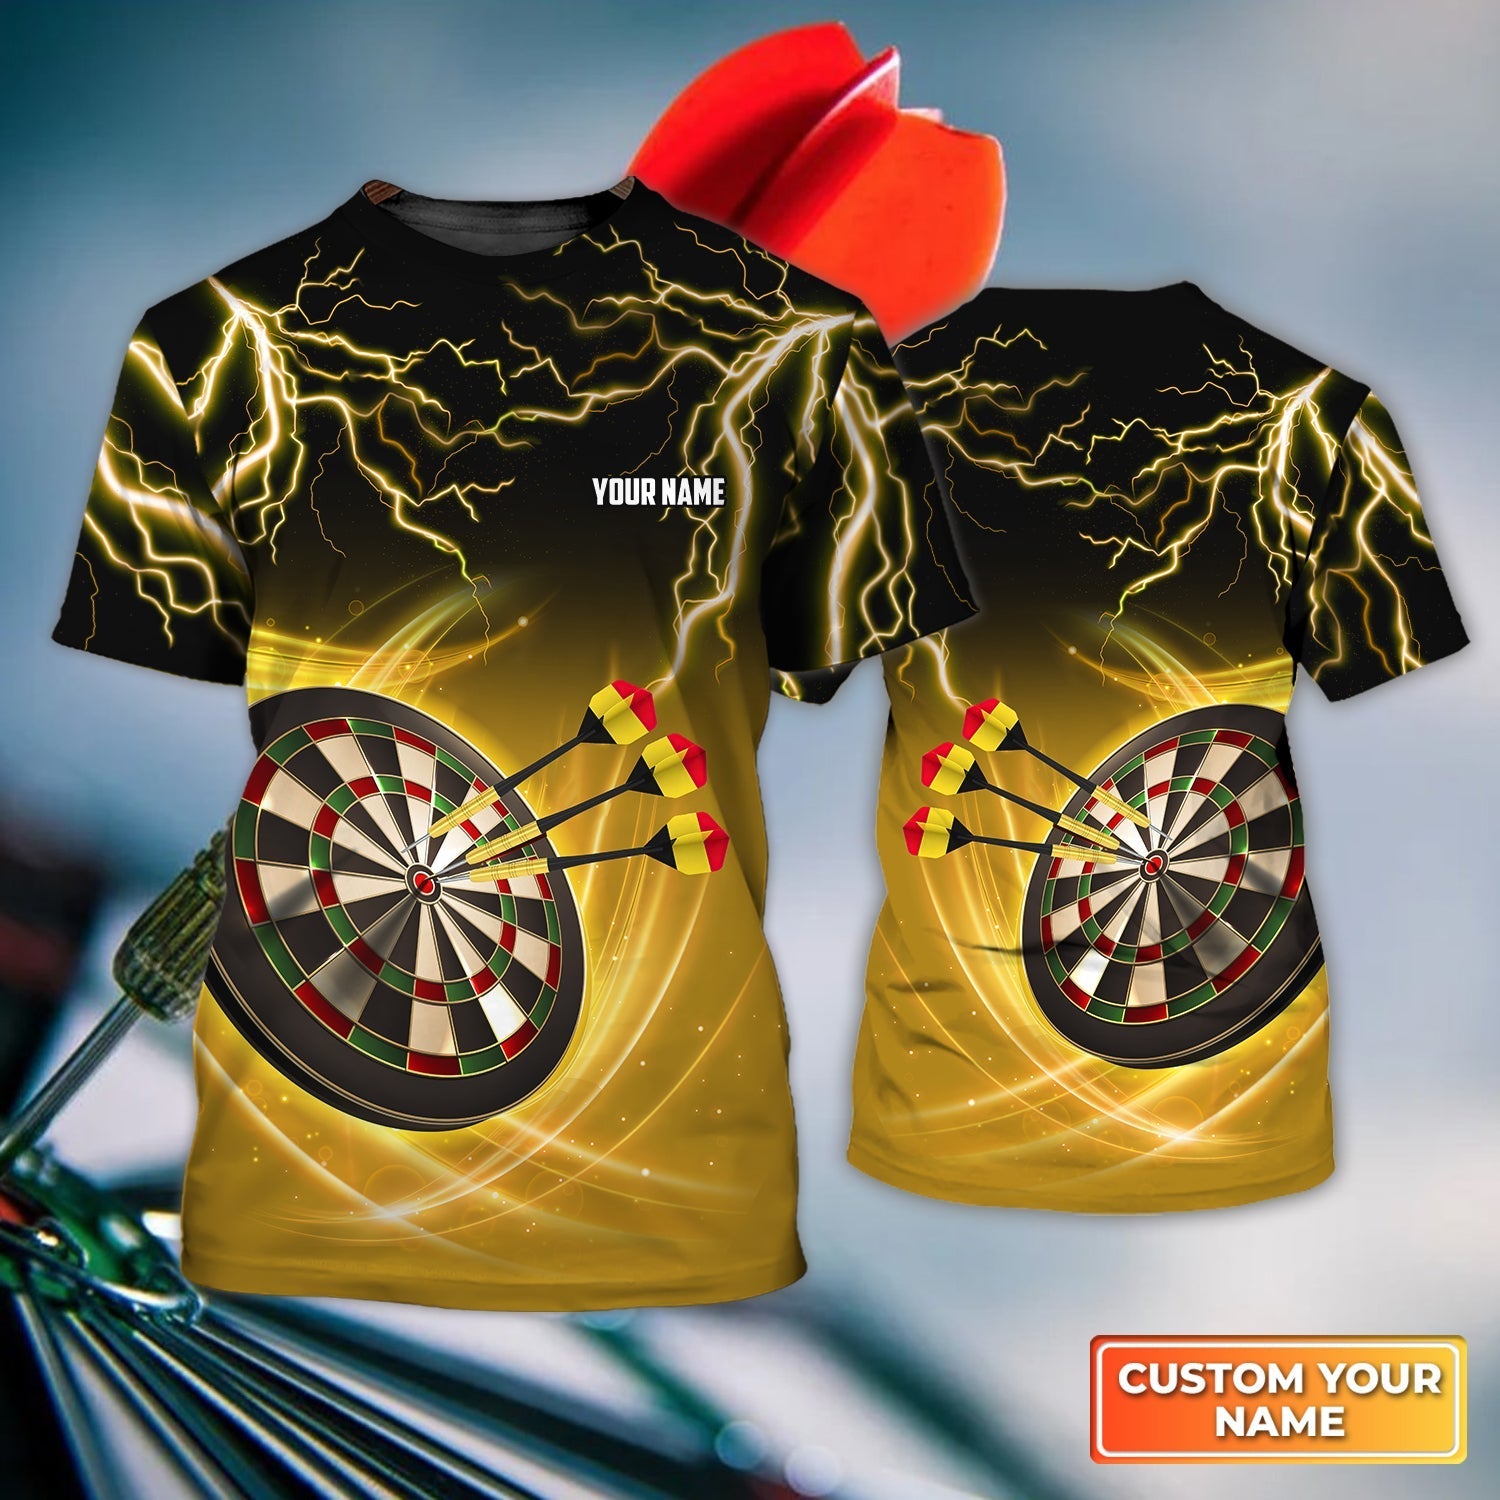 Happiness Is A Tight Threesome shirt, Personalized Name 3D Tshirt For Darts Player – DT179